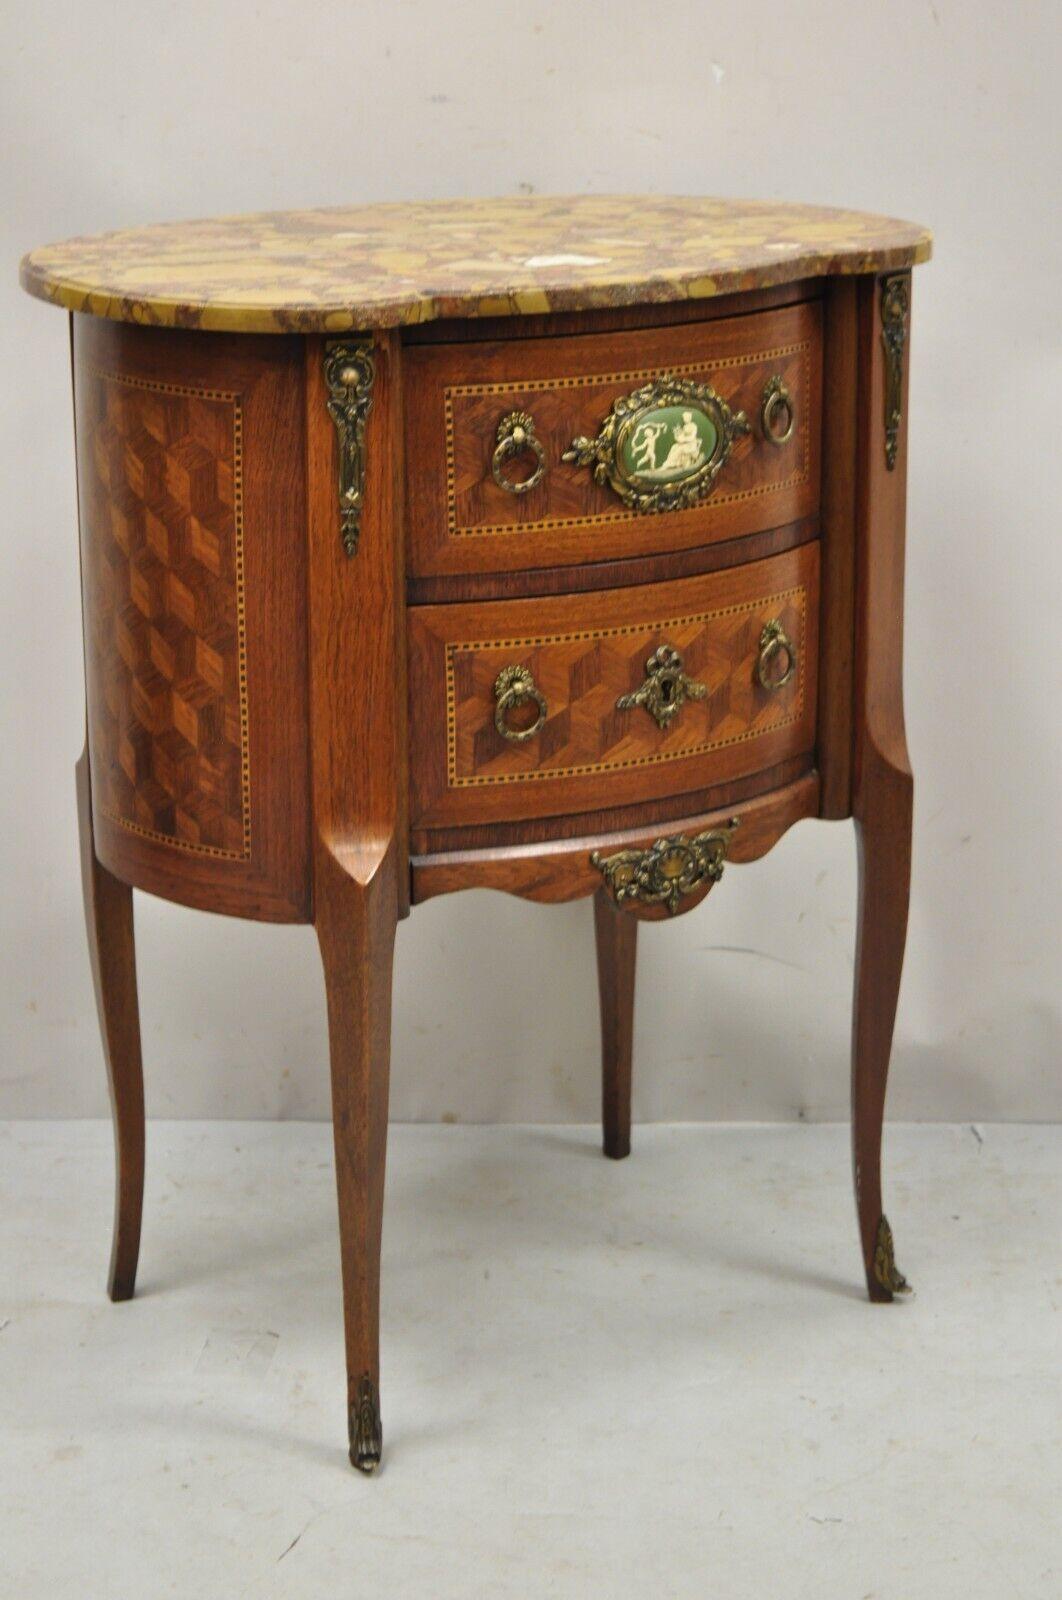 Antique French Louis XV style Rouge marble top bombe commode nightstand side table. Item features rouge marble top, green jasperware medallion to drawer, bronze ormolu, satinwood marquetery inlay. Circa early 1900s. Measurements: 29